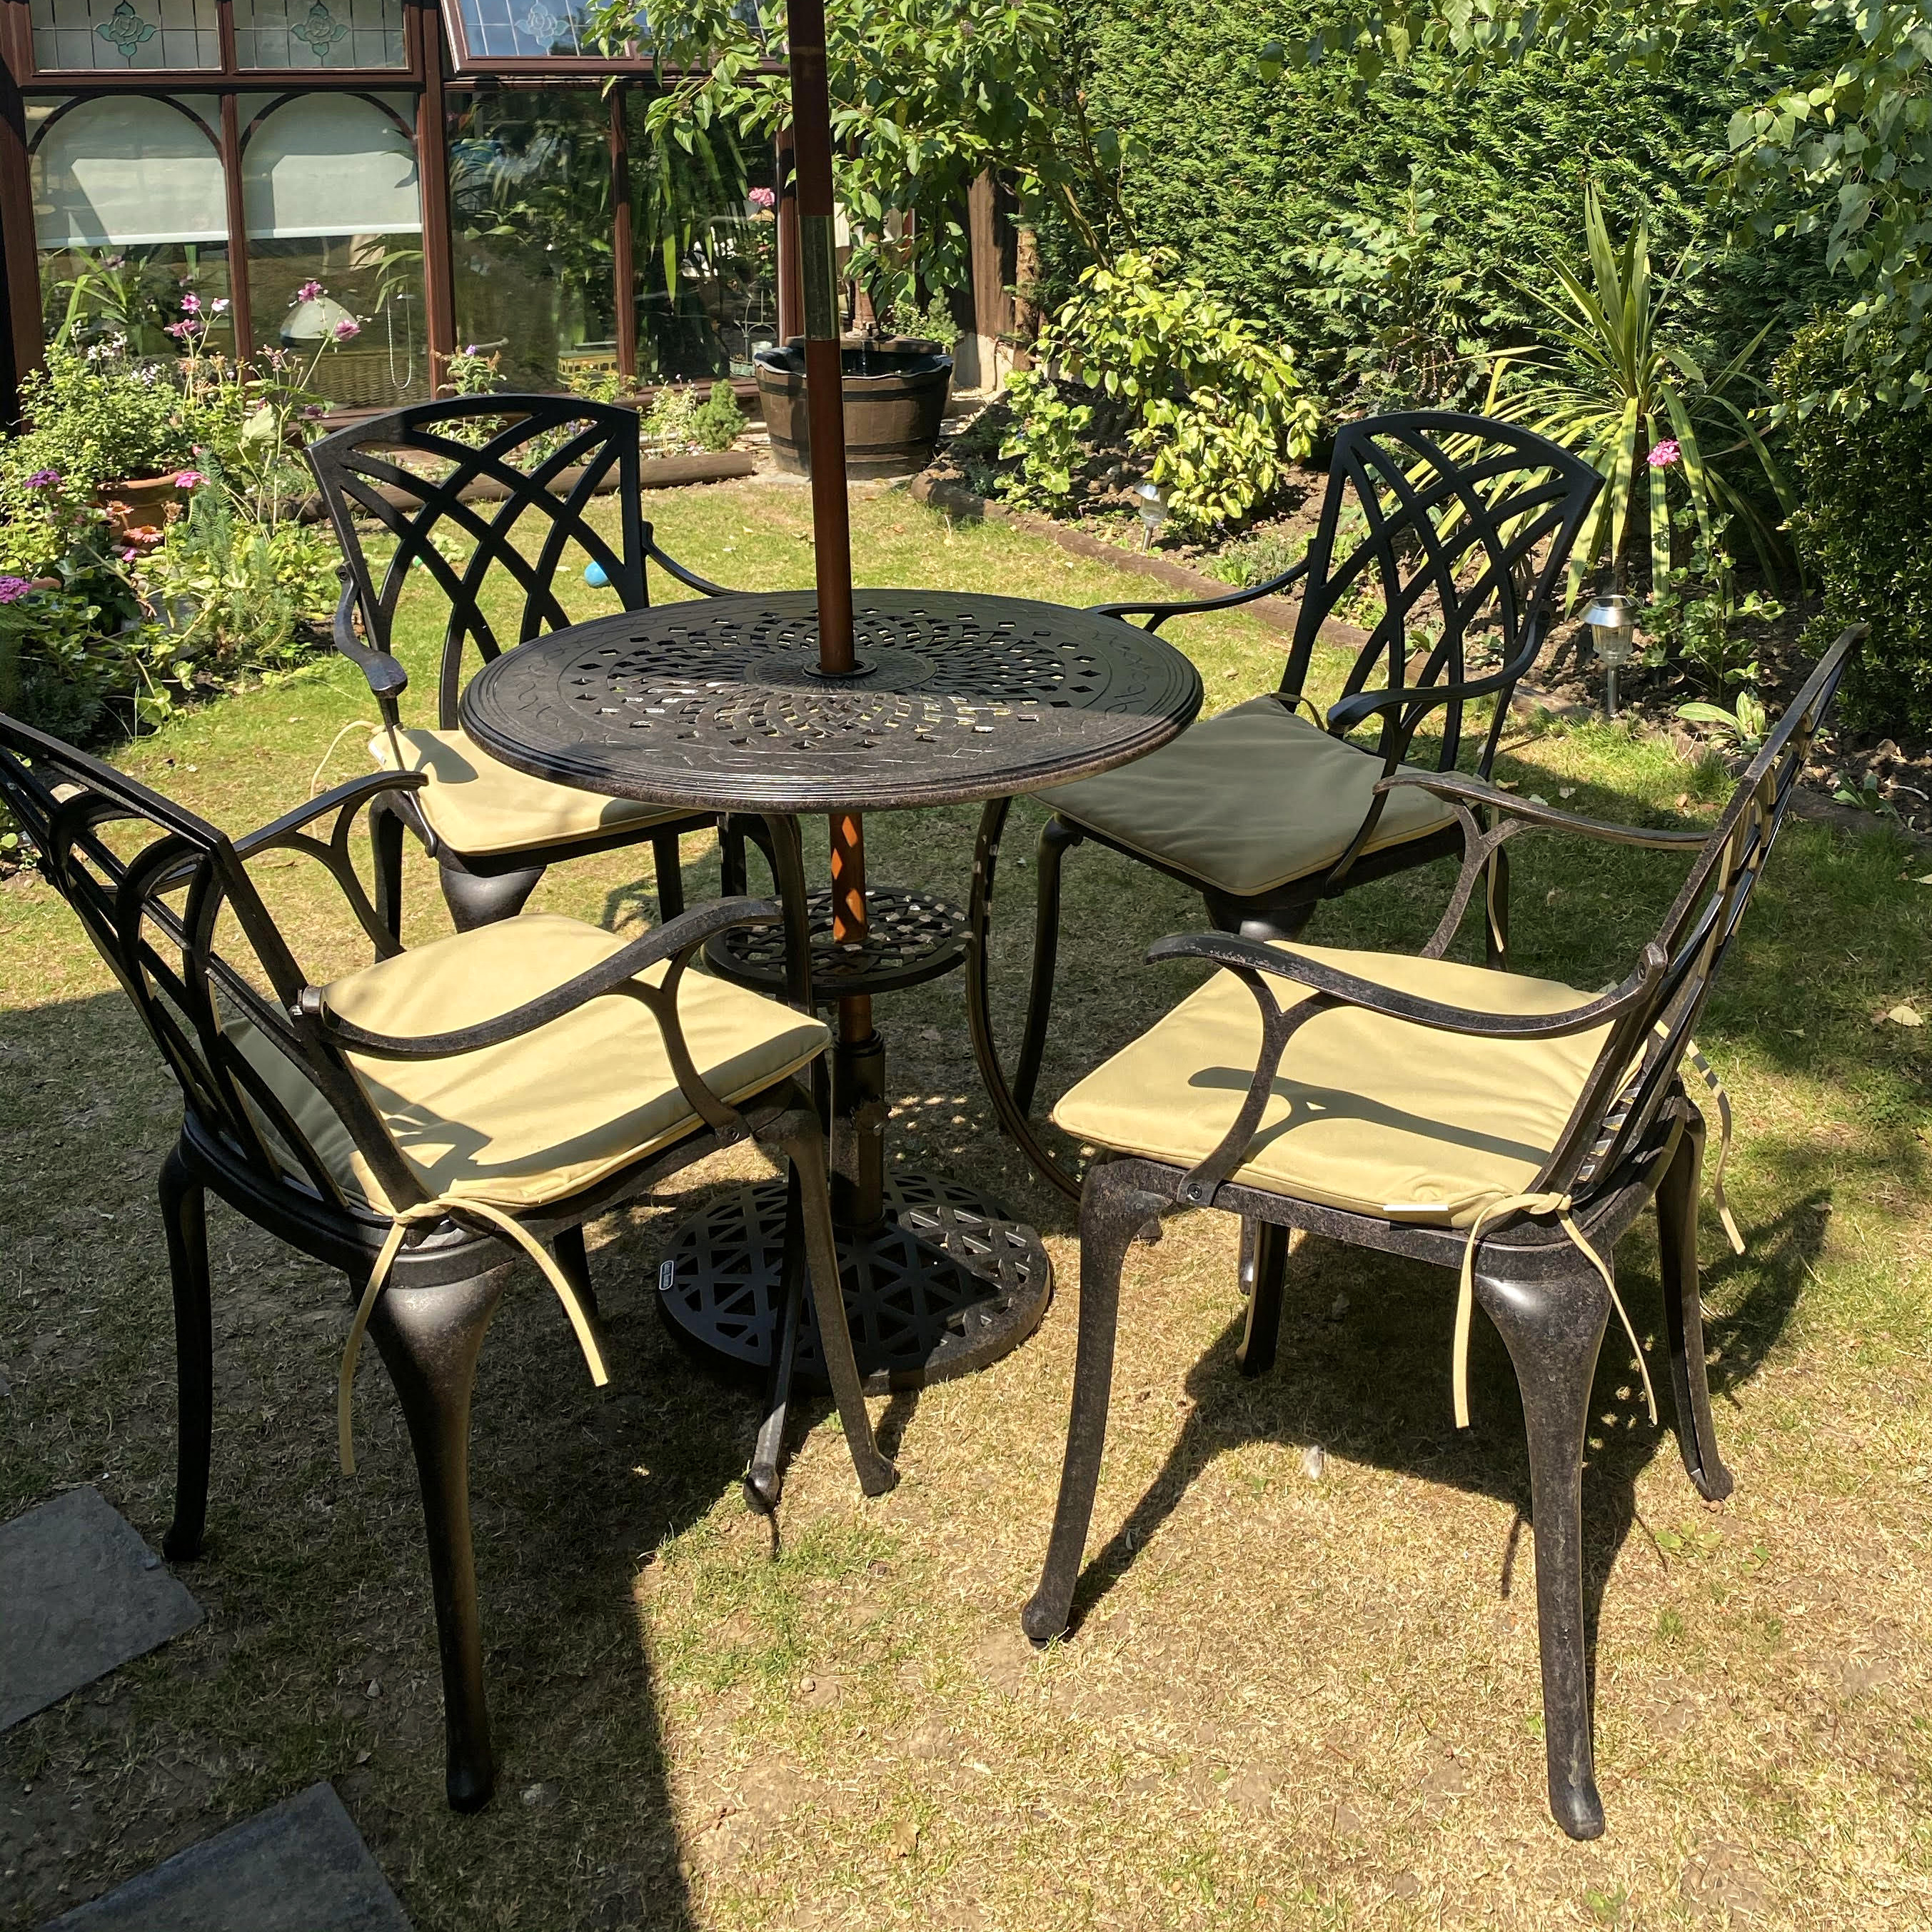 Bronze - & Anna Lazy Set Susan | Table Small 4 Patio Chairs